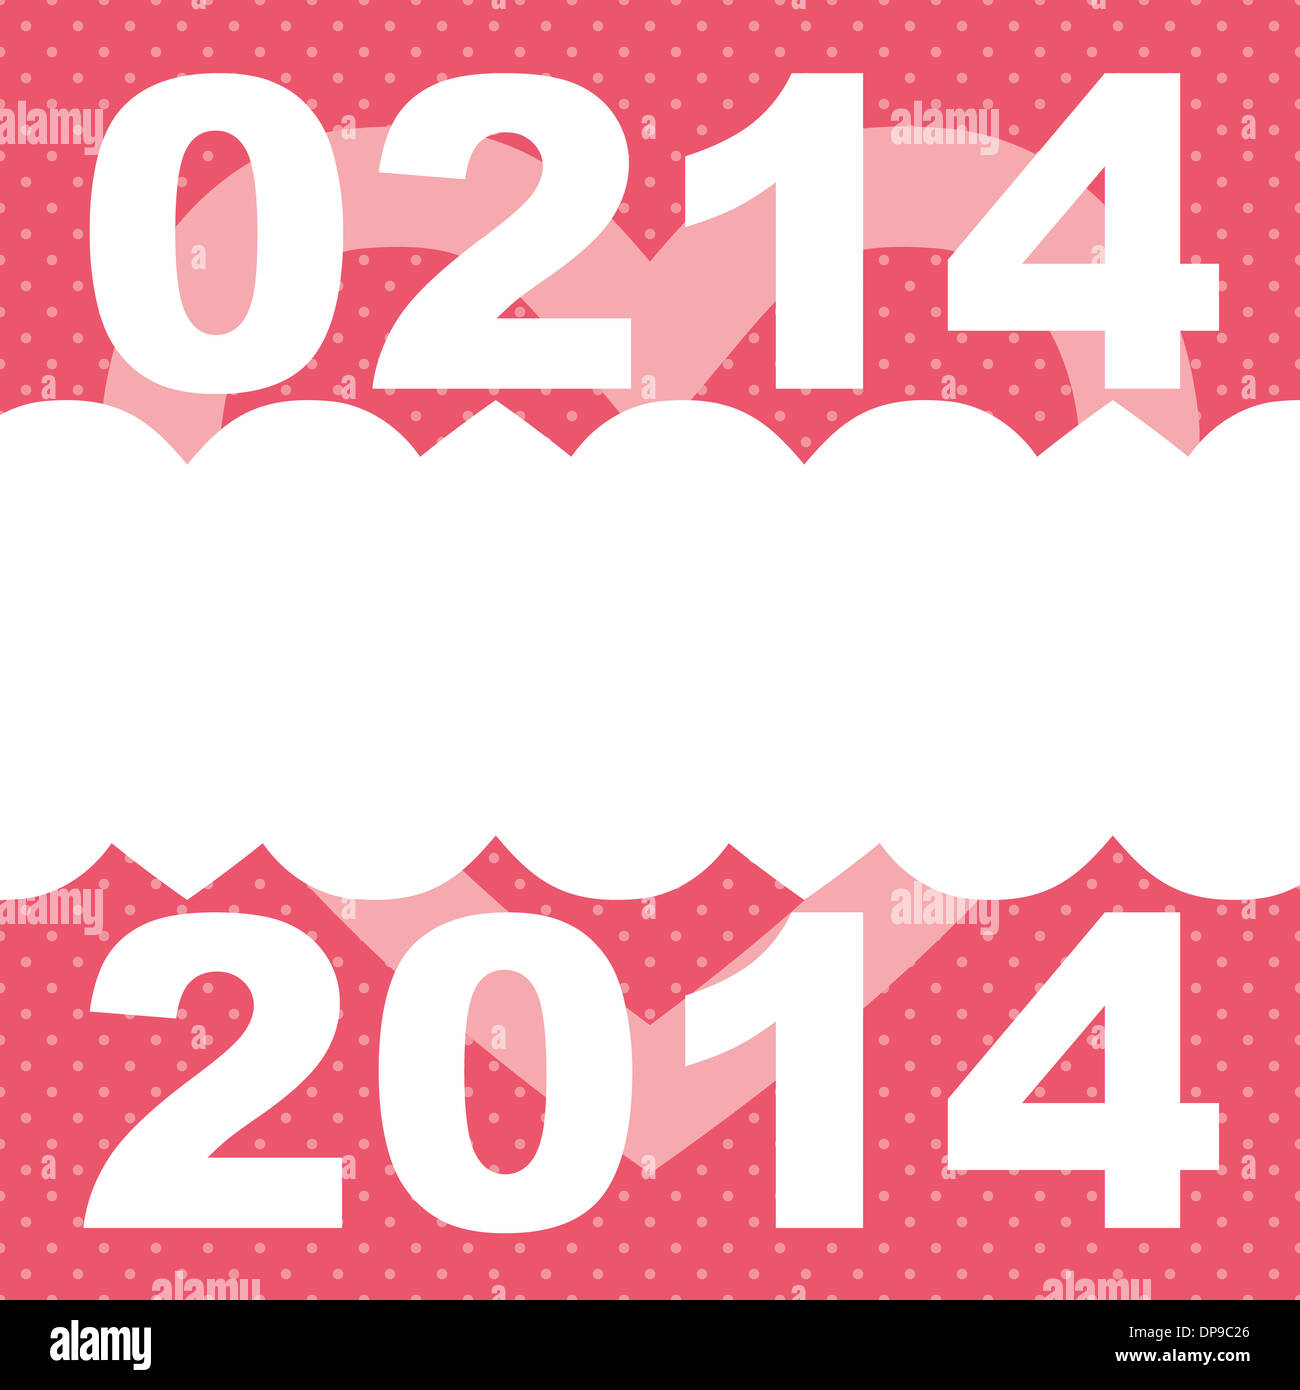 Valentine's Day 0214 and 2014 as pink illustration, close up Stock Photo